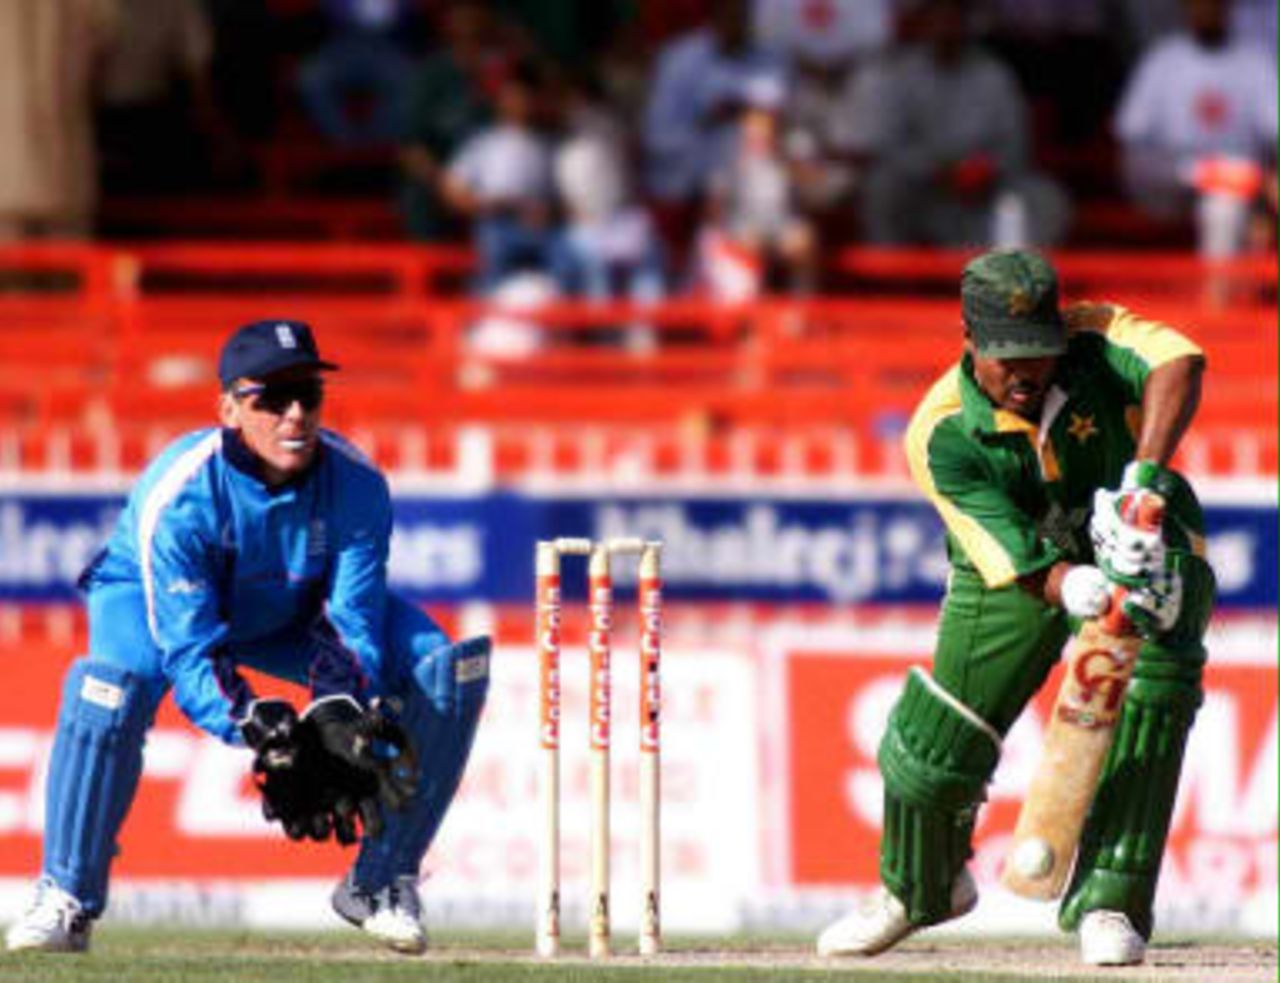 Ijaz Ahmed leans forward to middle the ball while being watched carefully by England skipper and wicketkeeper, Alec Stewart, on 7th April 1999 at Sharjah in the Coca Cola Cup.